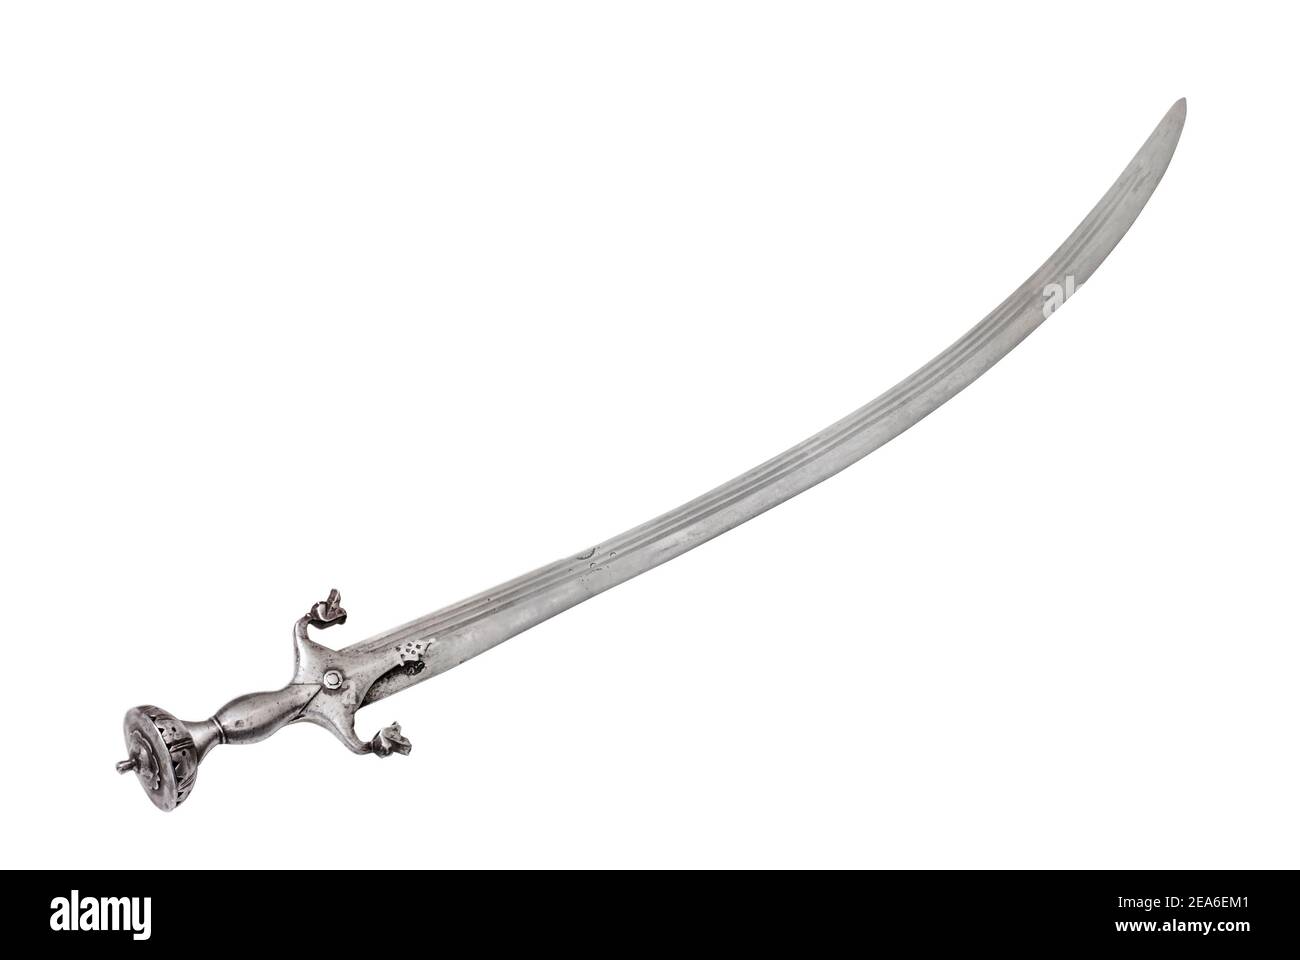 Vintage Afghan saber (sabre) Talwar type. The 18-19th centuries. Path on white background. Stock Photo